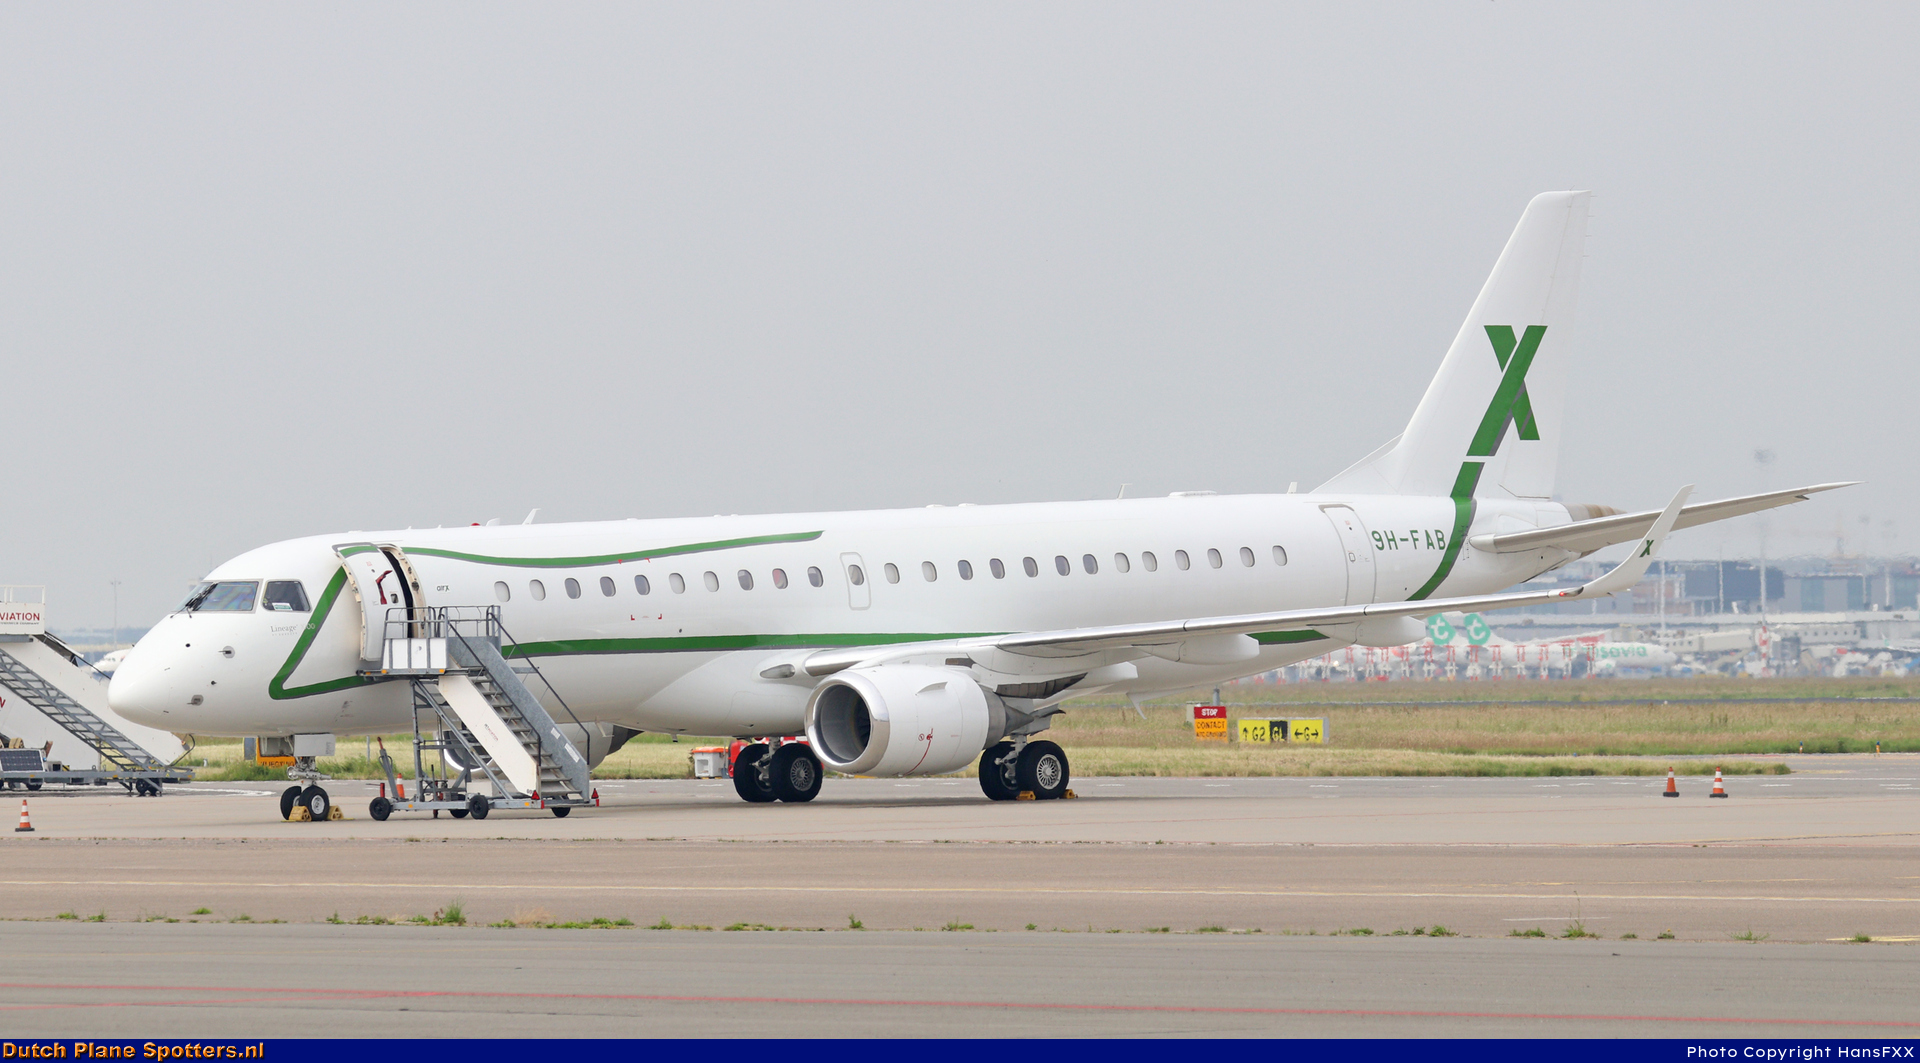 9H-FAB Embraer 190 (Lineage 1000) Air X Charter by HansFXX